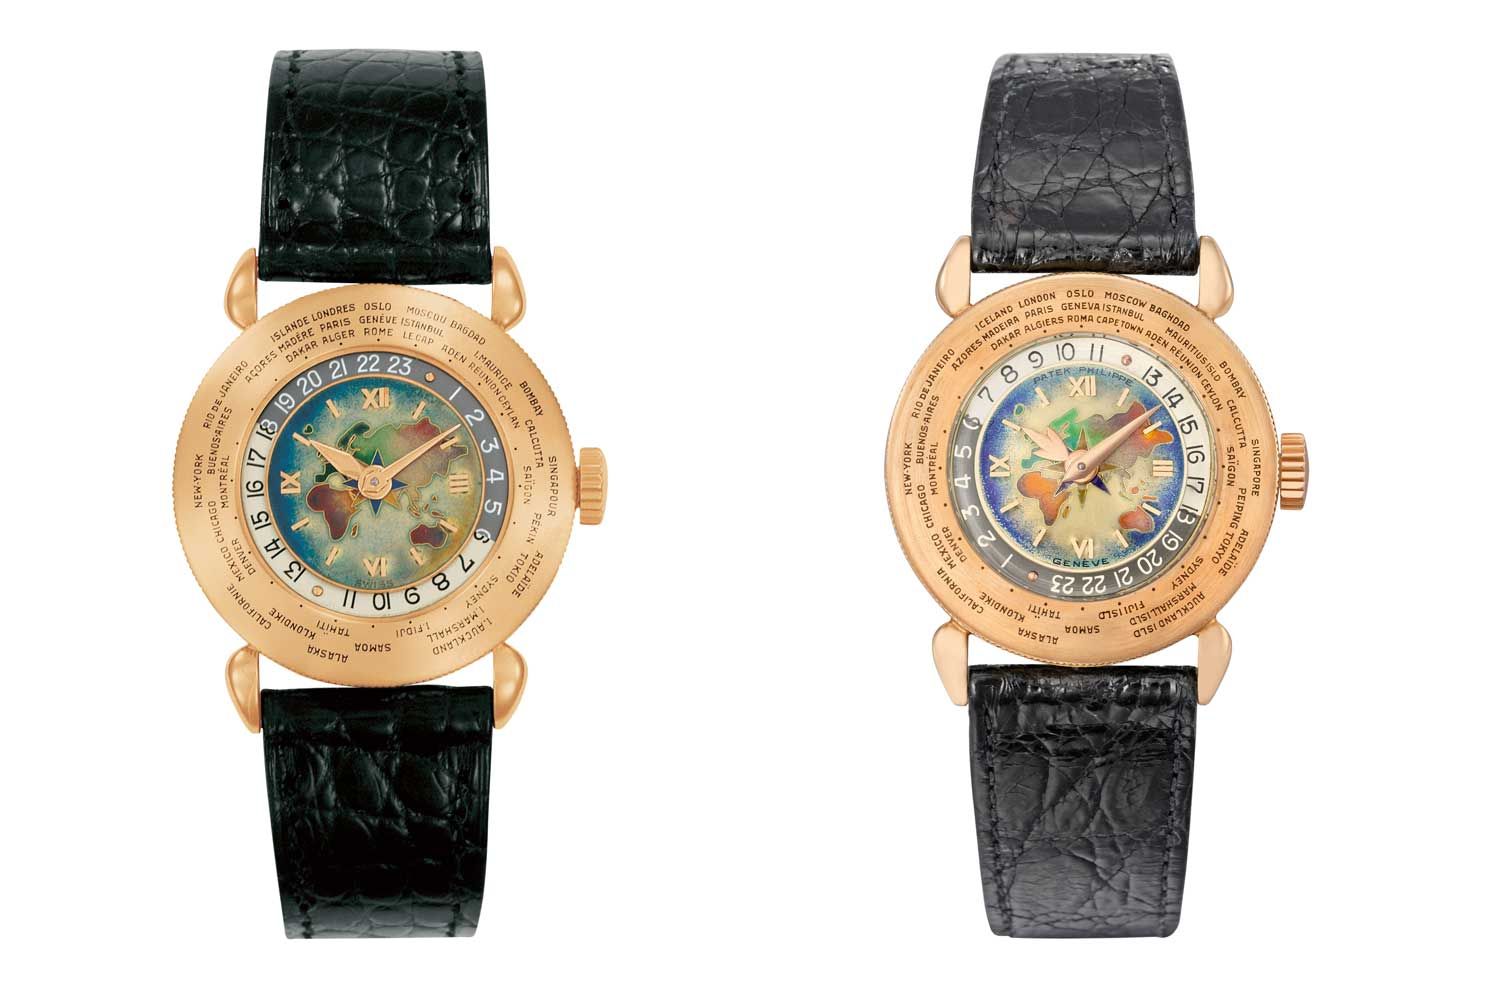 Louis Cottier designed some truly ornate and beautiful hands for 1415. Some of the most distinct are Cottier’s circular or fleur-de-lys hour hand usually combined with a sword shaped minute hand. (Images : Patek Philippe)